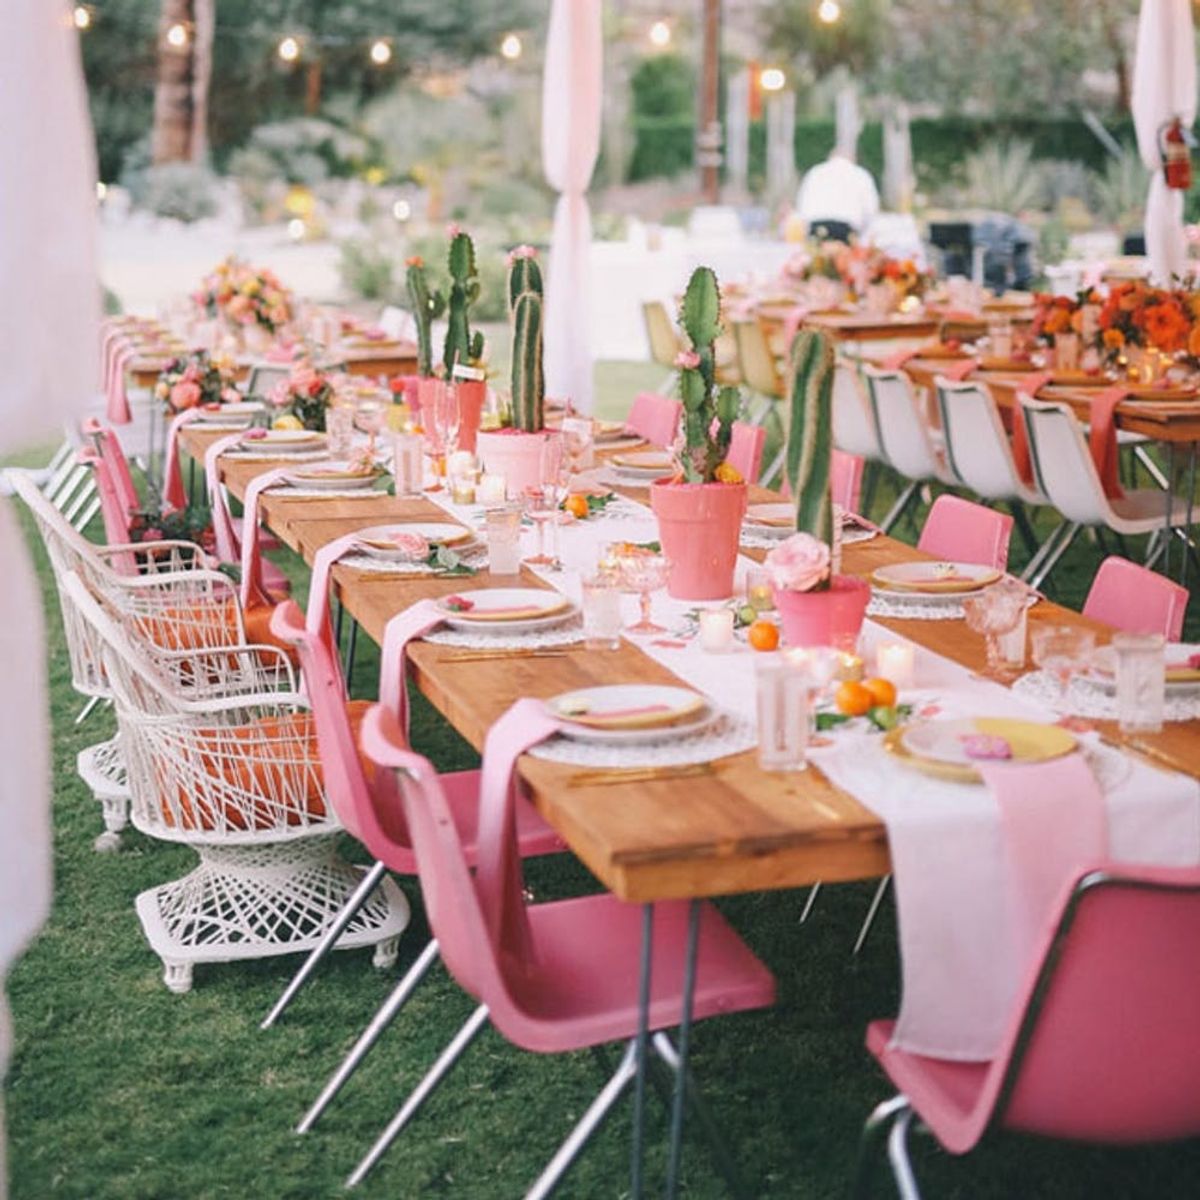 This New Vacation-Inspired Wedding Trend Is Desert-Chic in All the Right Ways